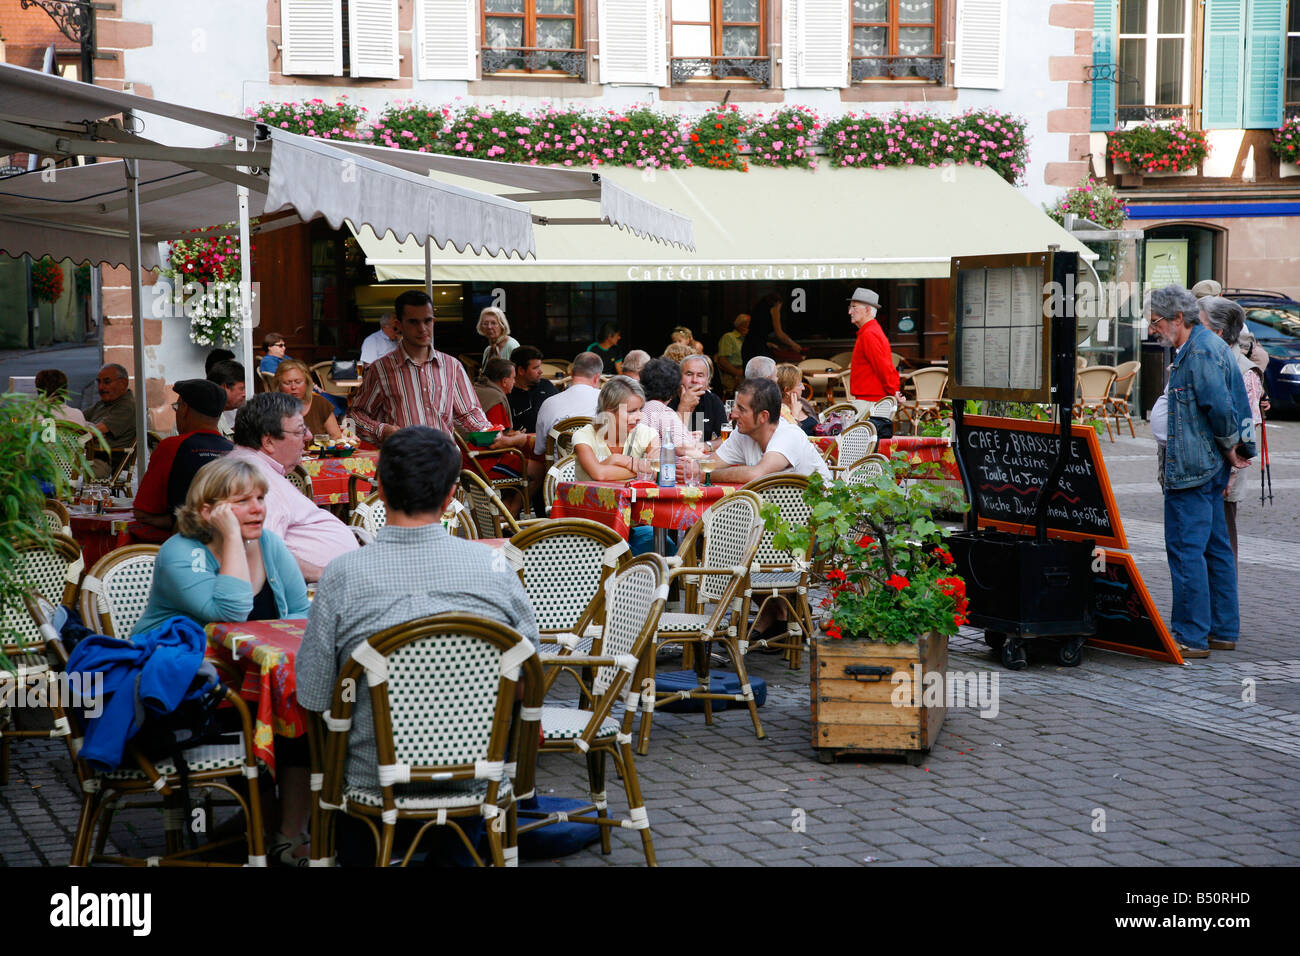 Sep 2008 - People sitting at an outdoors restaurant in Ribeauville village Alsace France Stock Photo